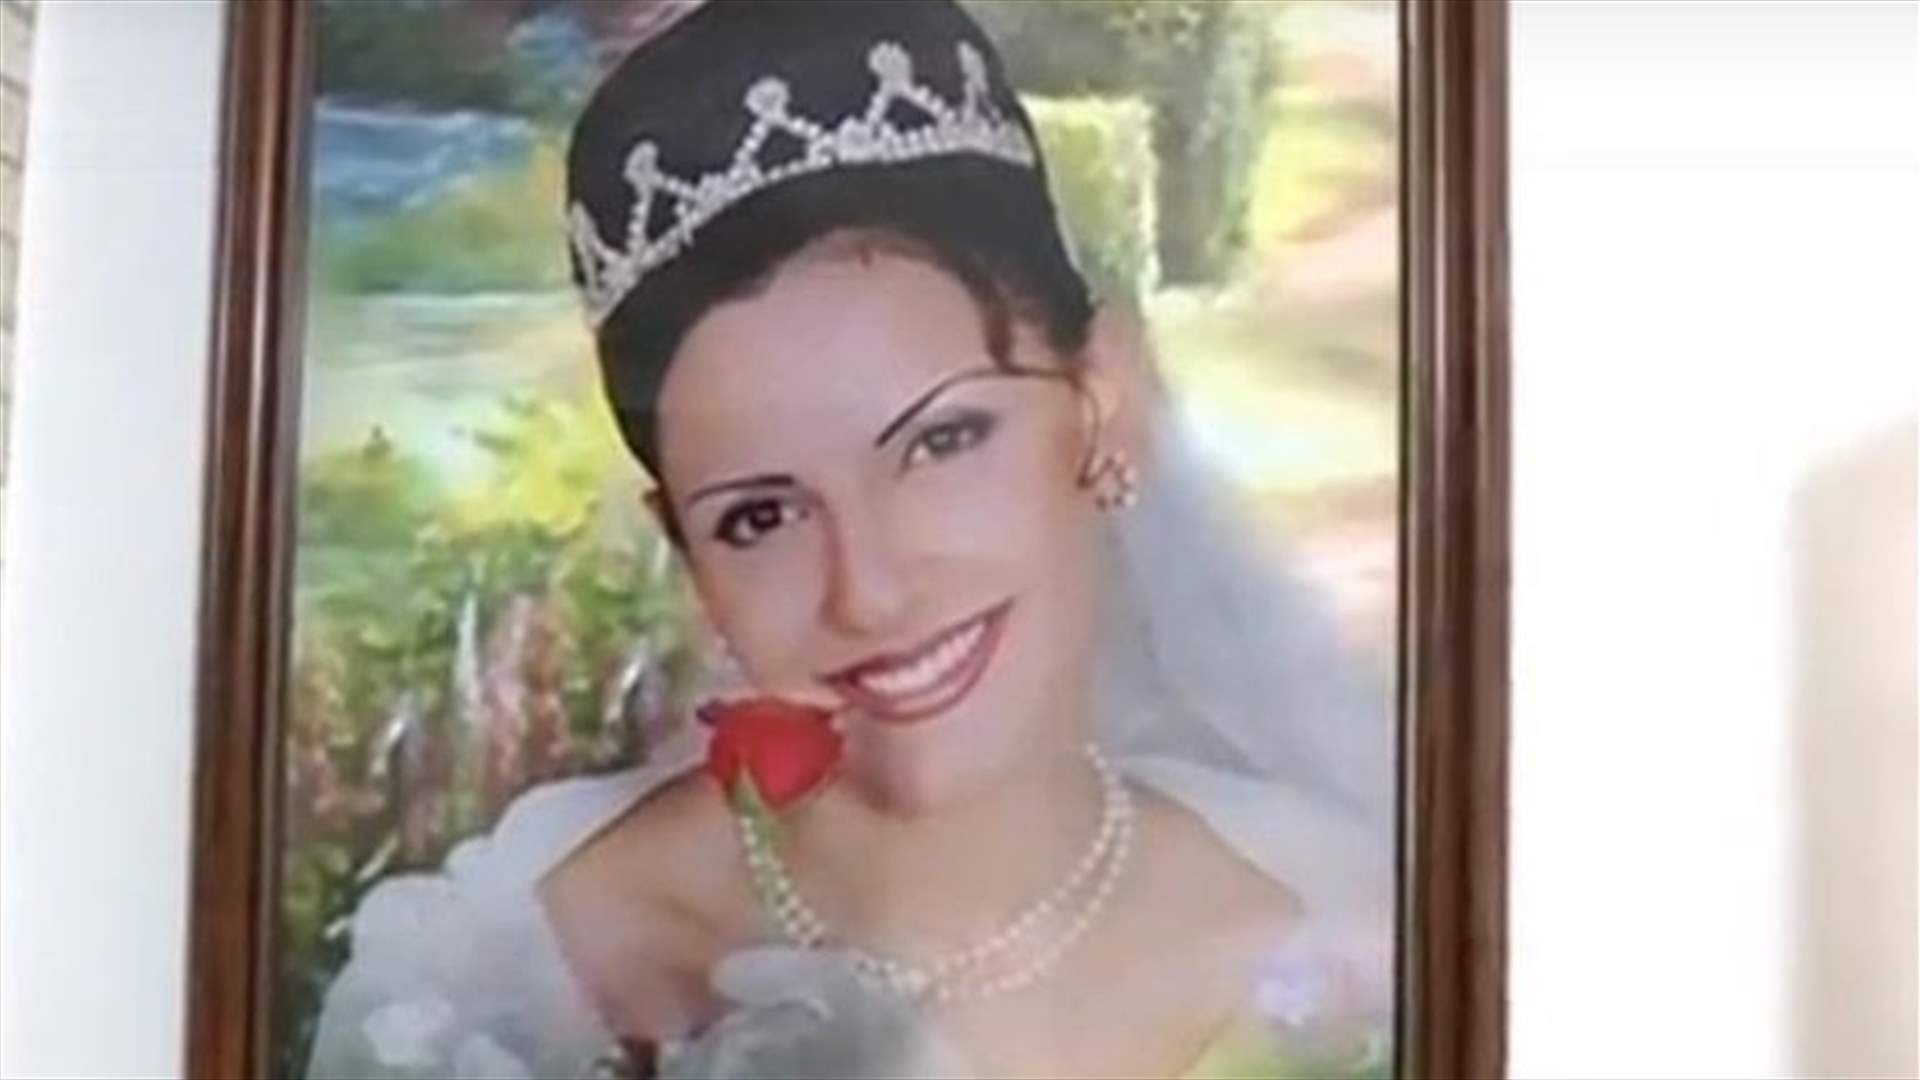 Court issues verdict in case of Roula Yaacoub’s murder